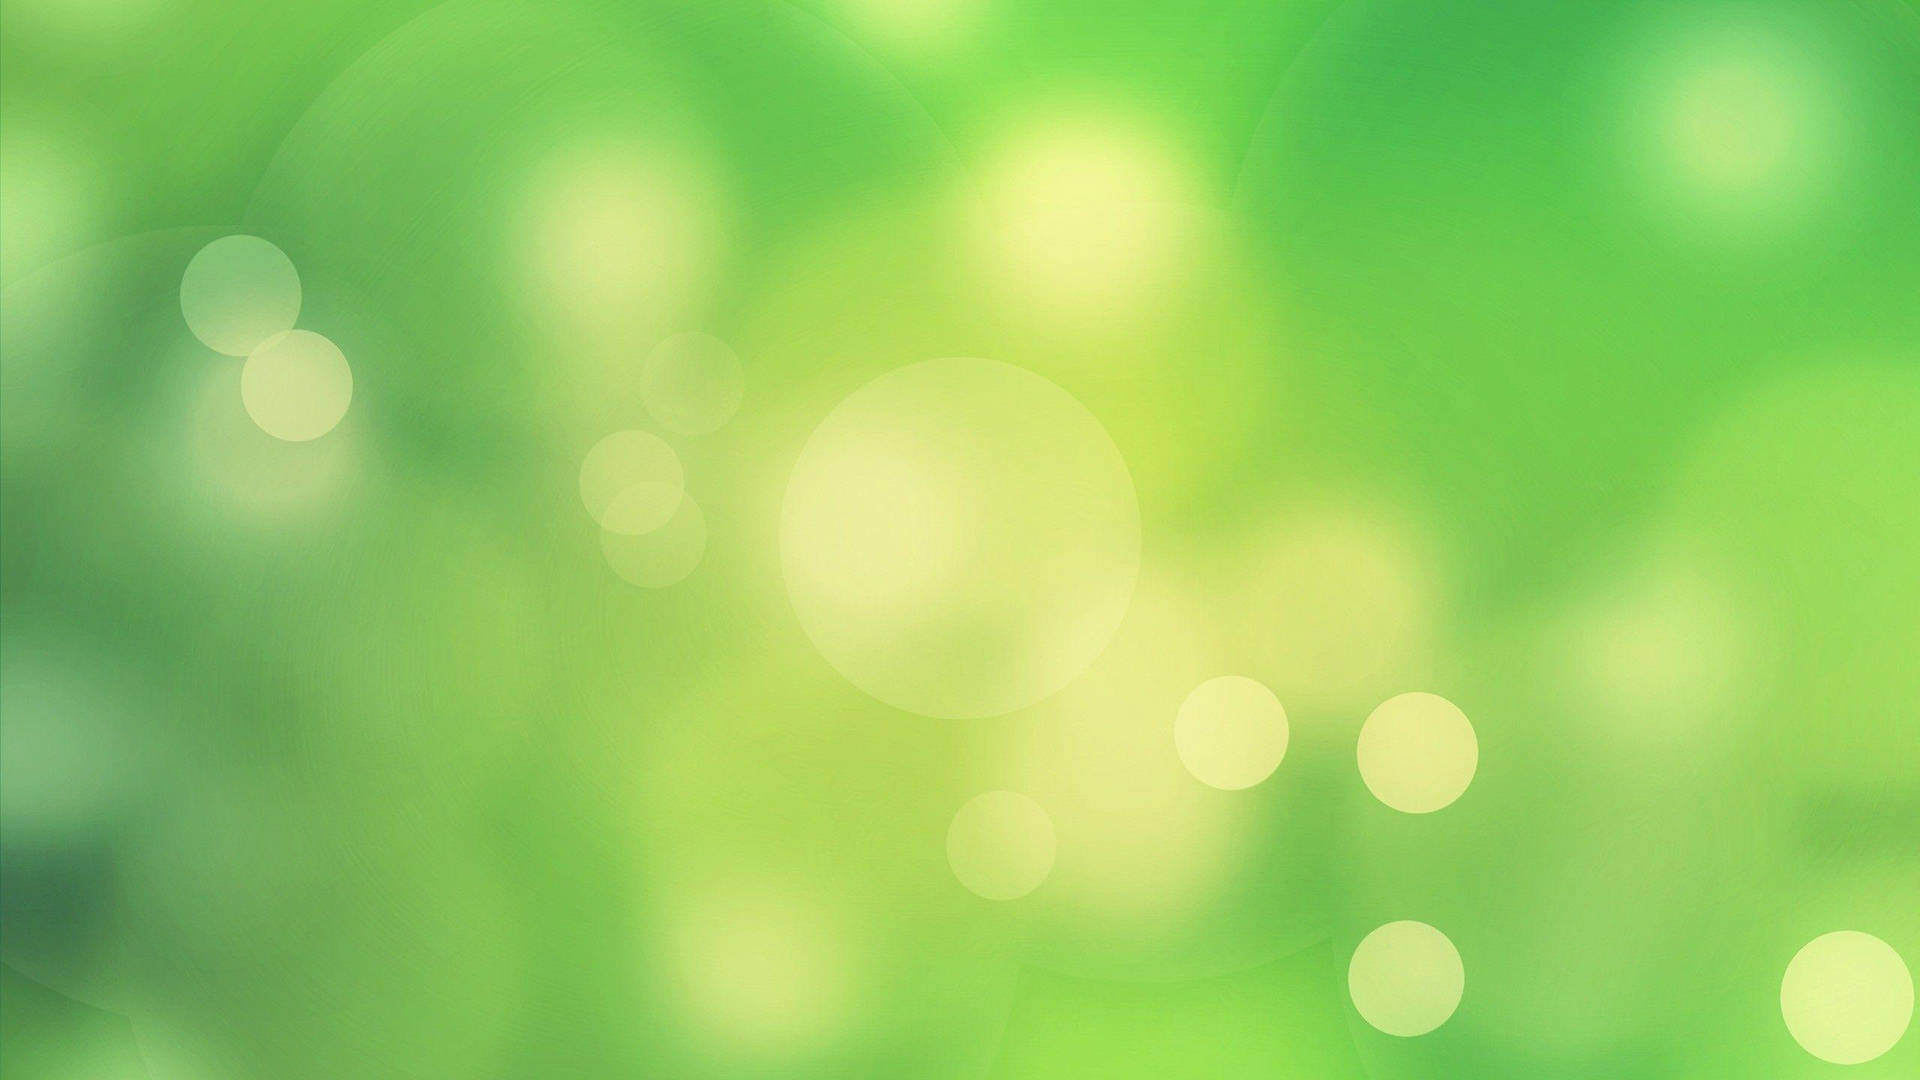 Bright Green Pictures  Download Free Images on Unsplash